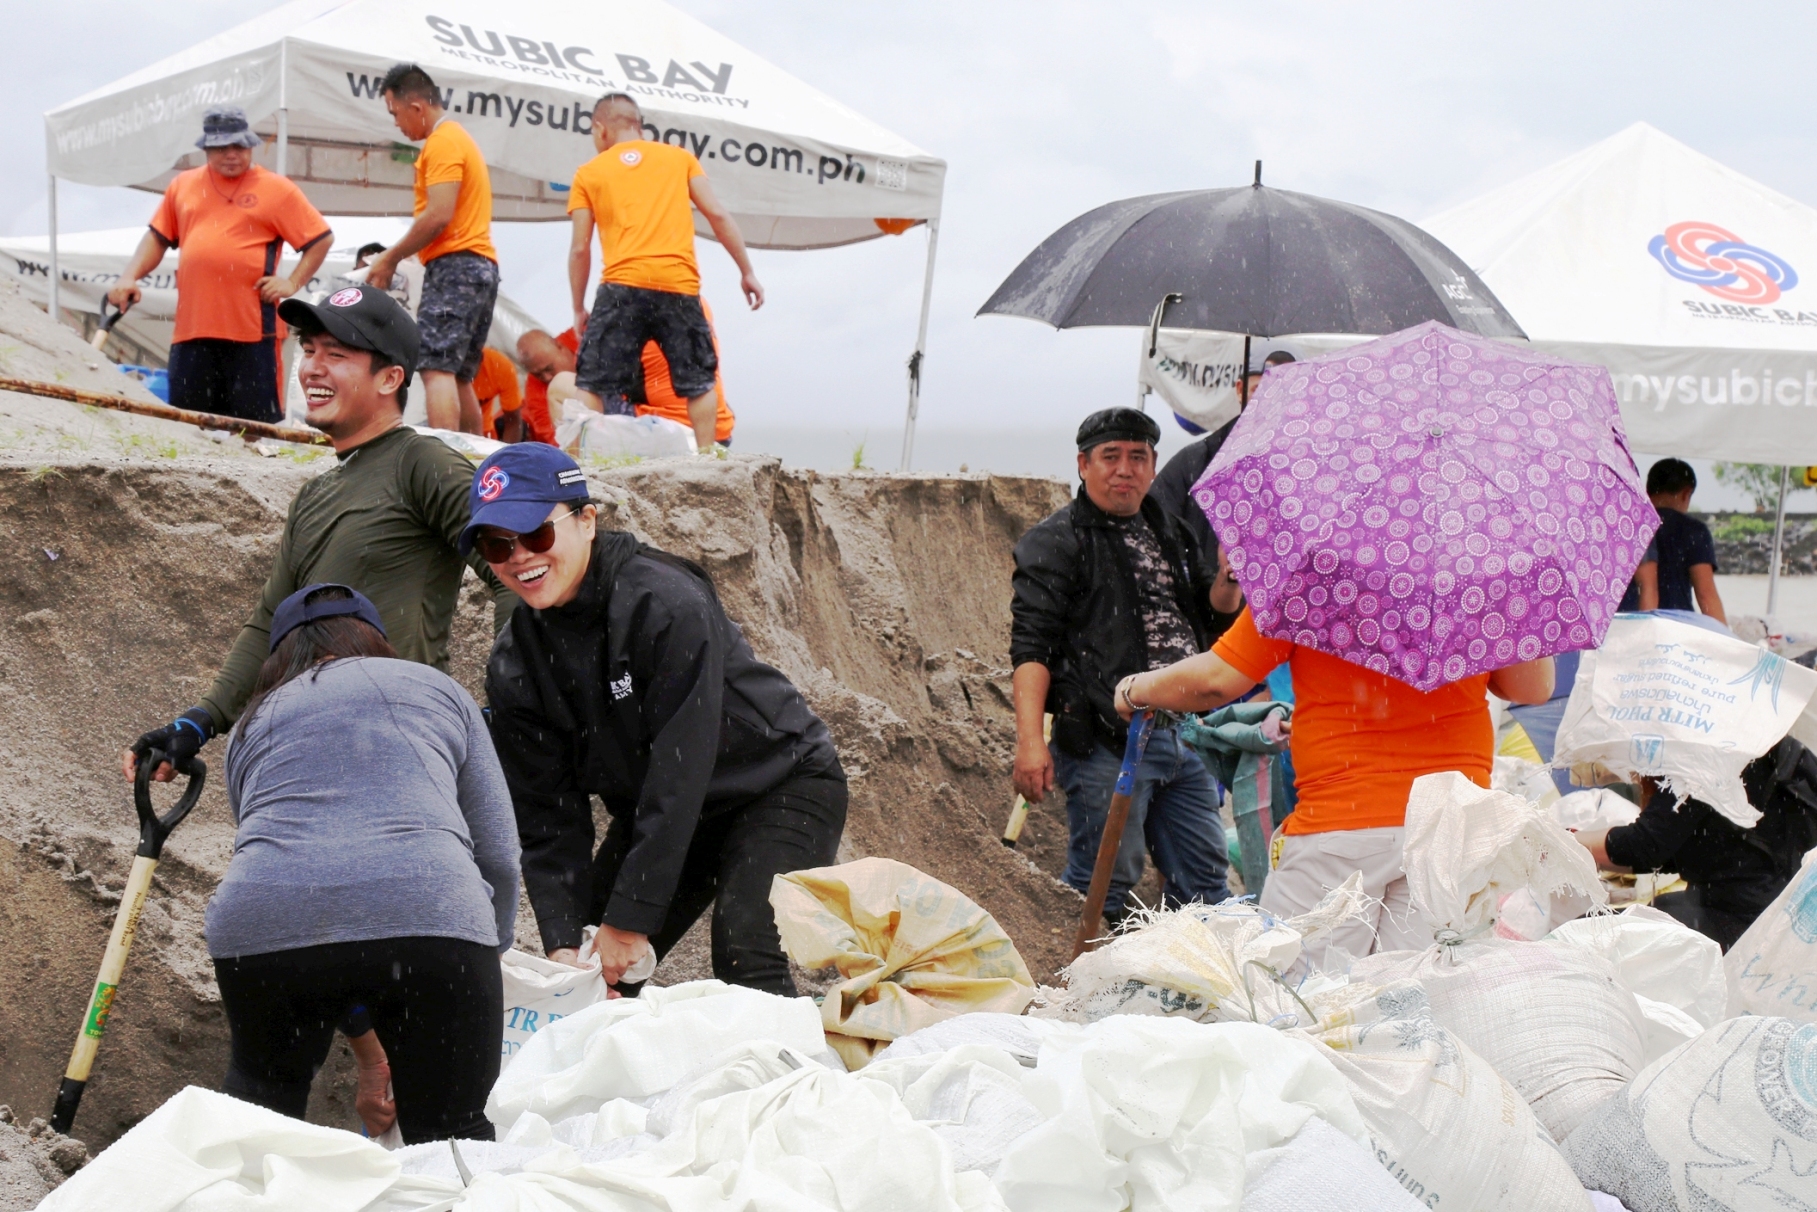 SBMA Chairman and Administrator Wilma T. Eisma joins volunteers in filling sandbags for use in slope protection at erosion-prone areas in the Subic Bay Freeport Zone.